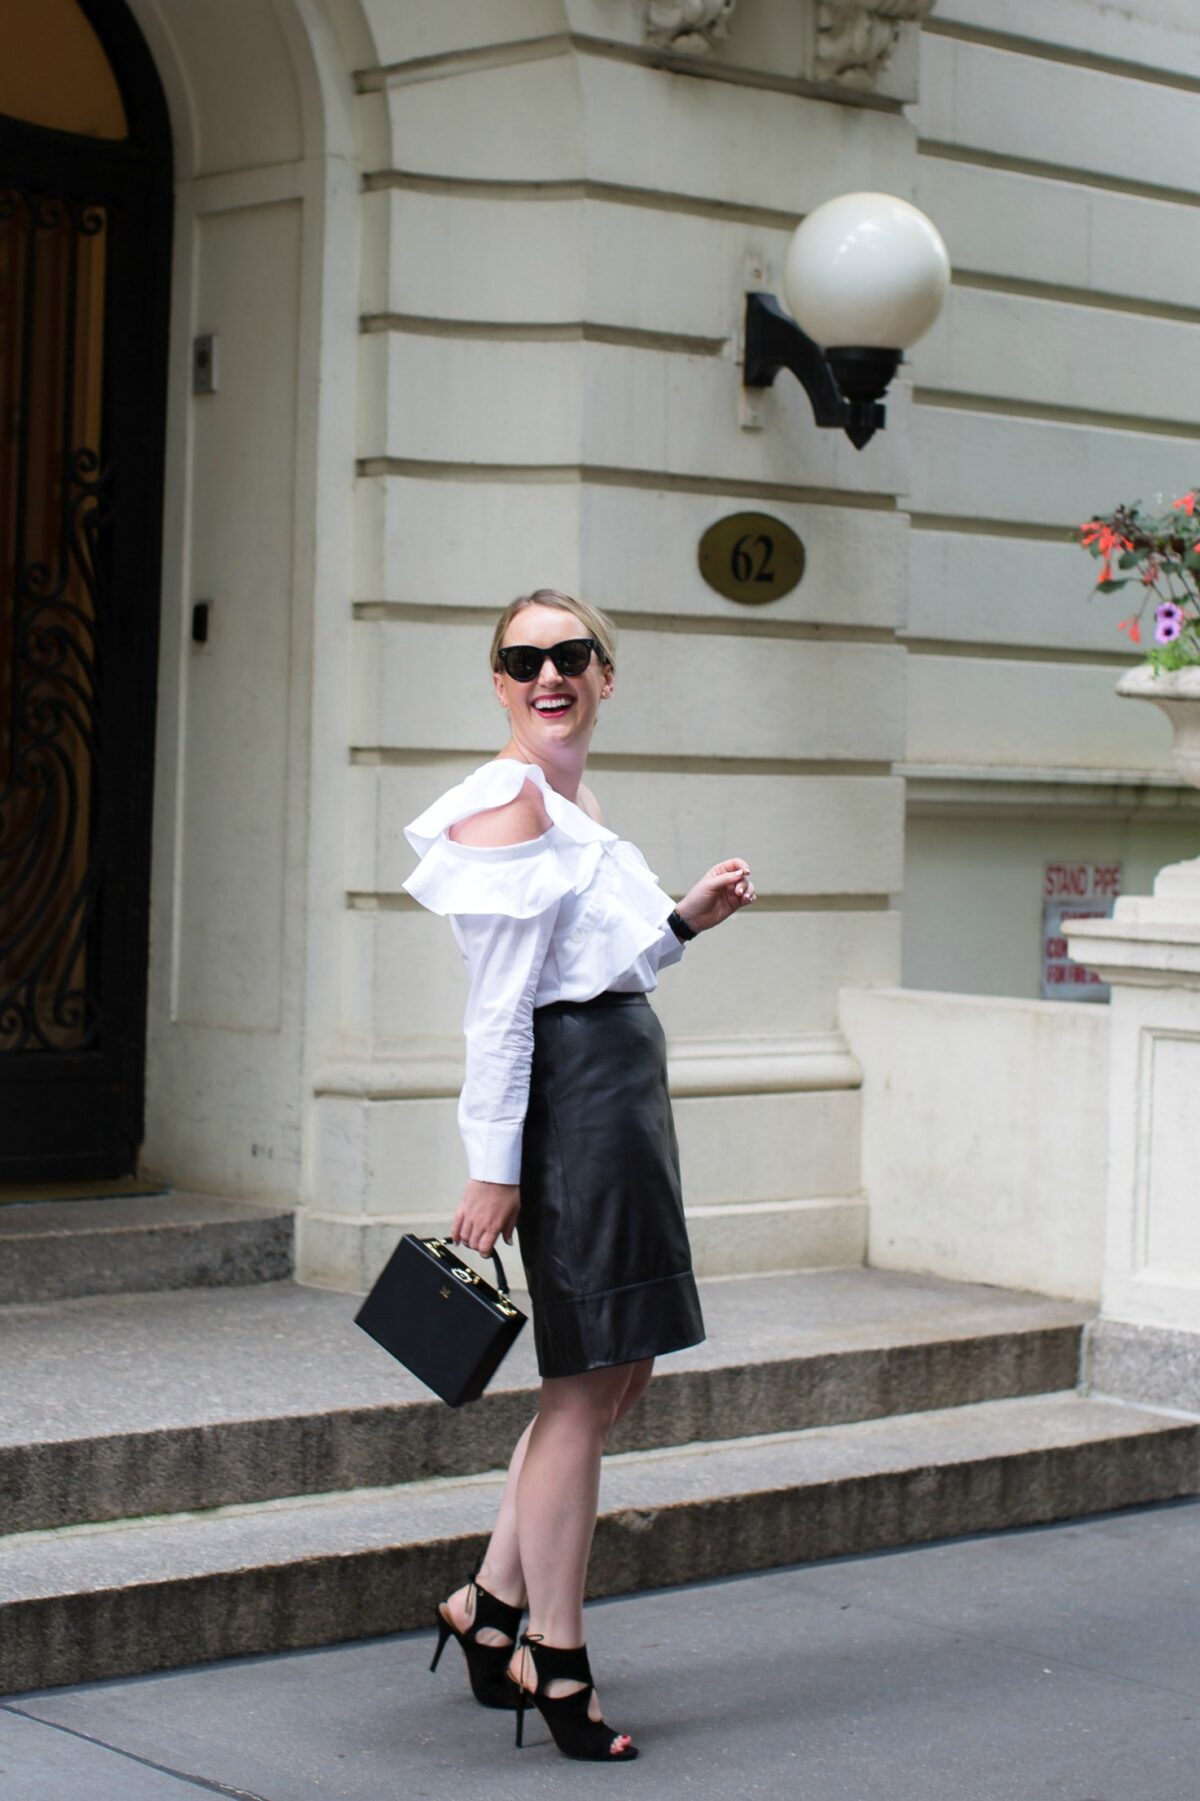 Meghan Donovan of wit & whimsy takes on Fall workwear